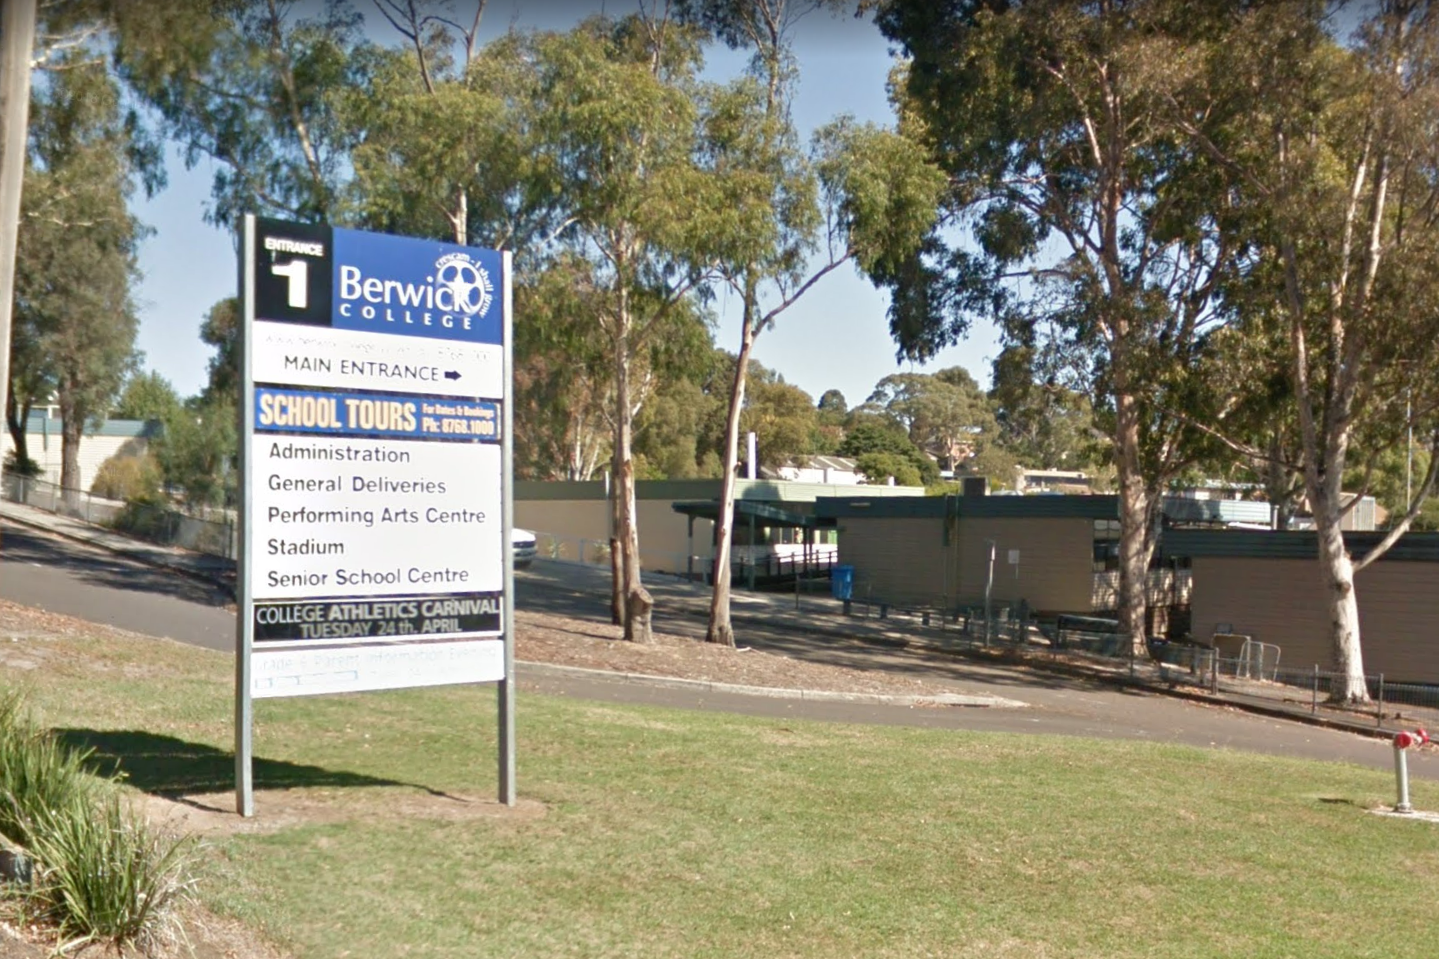 Article image for ‘There were about 40 kids involved’: Huge brawl forces Berwick school into lockdown, teacher attacked